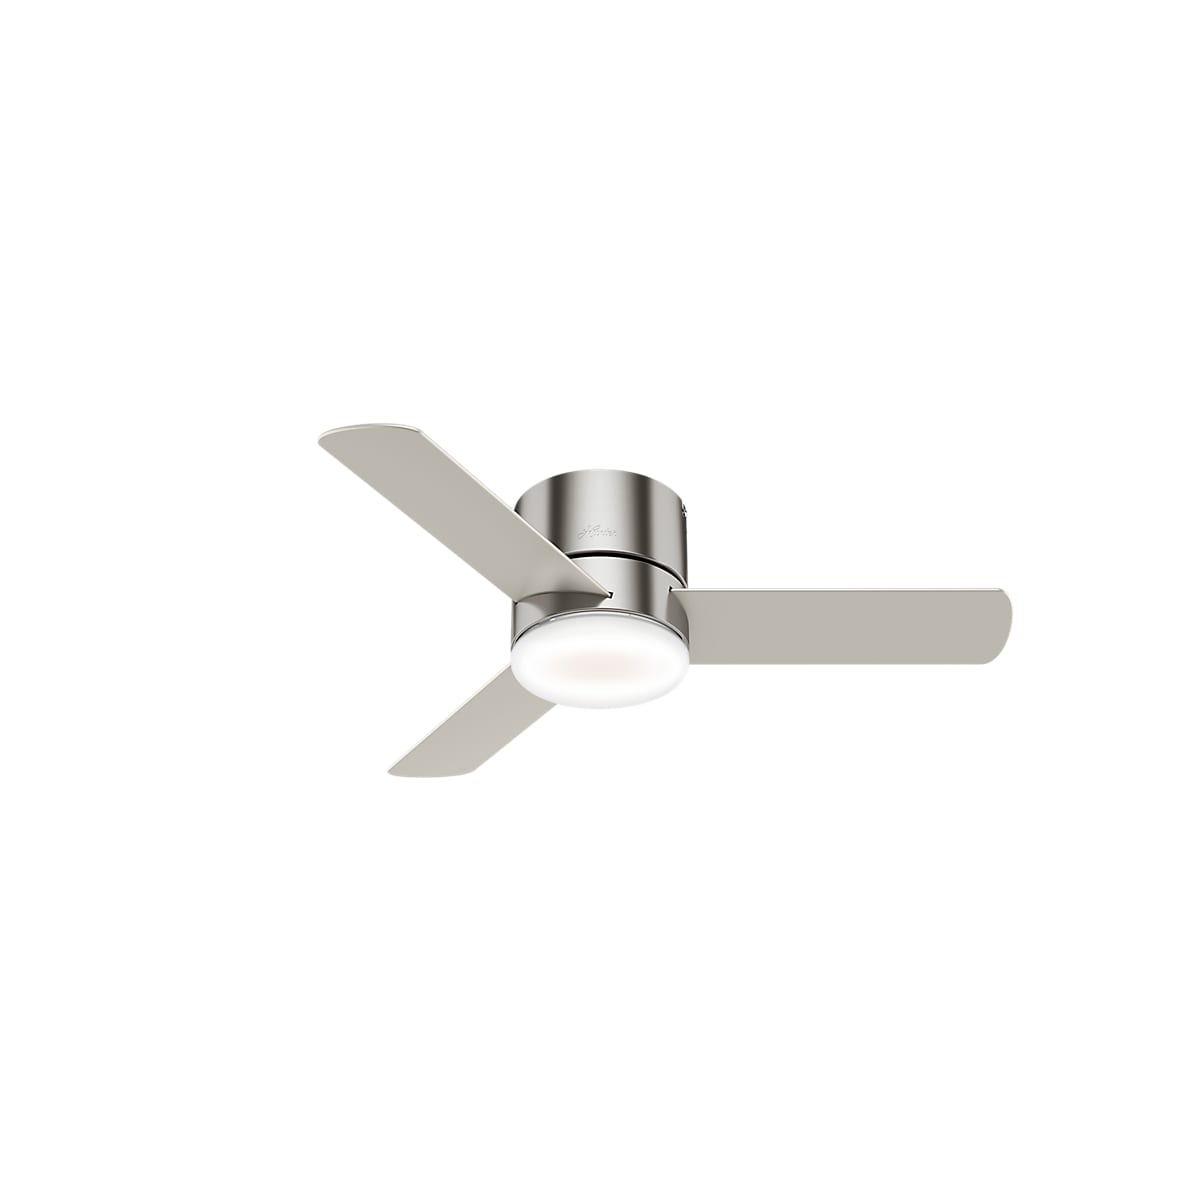 Minimus 44 Hugger Ceiling Fan, Hunter White Ceiling Fan With Light And Remote Control